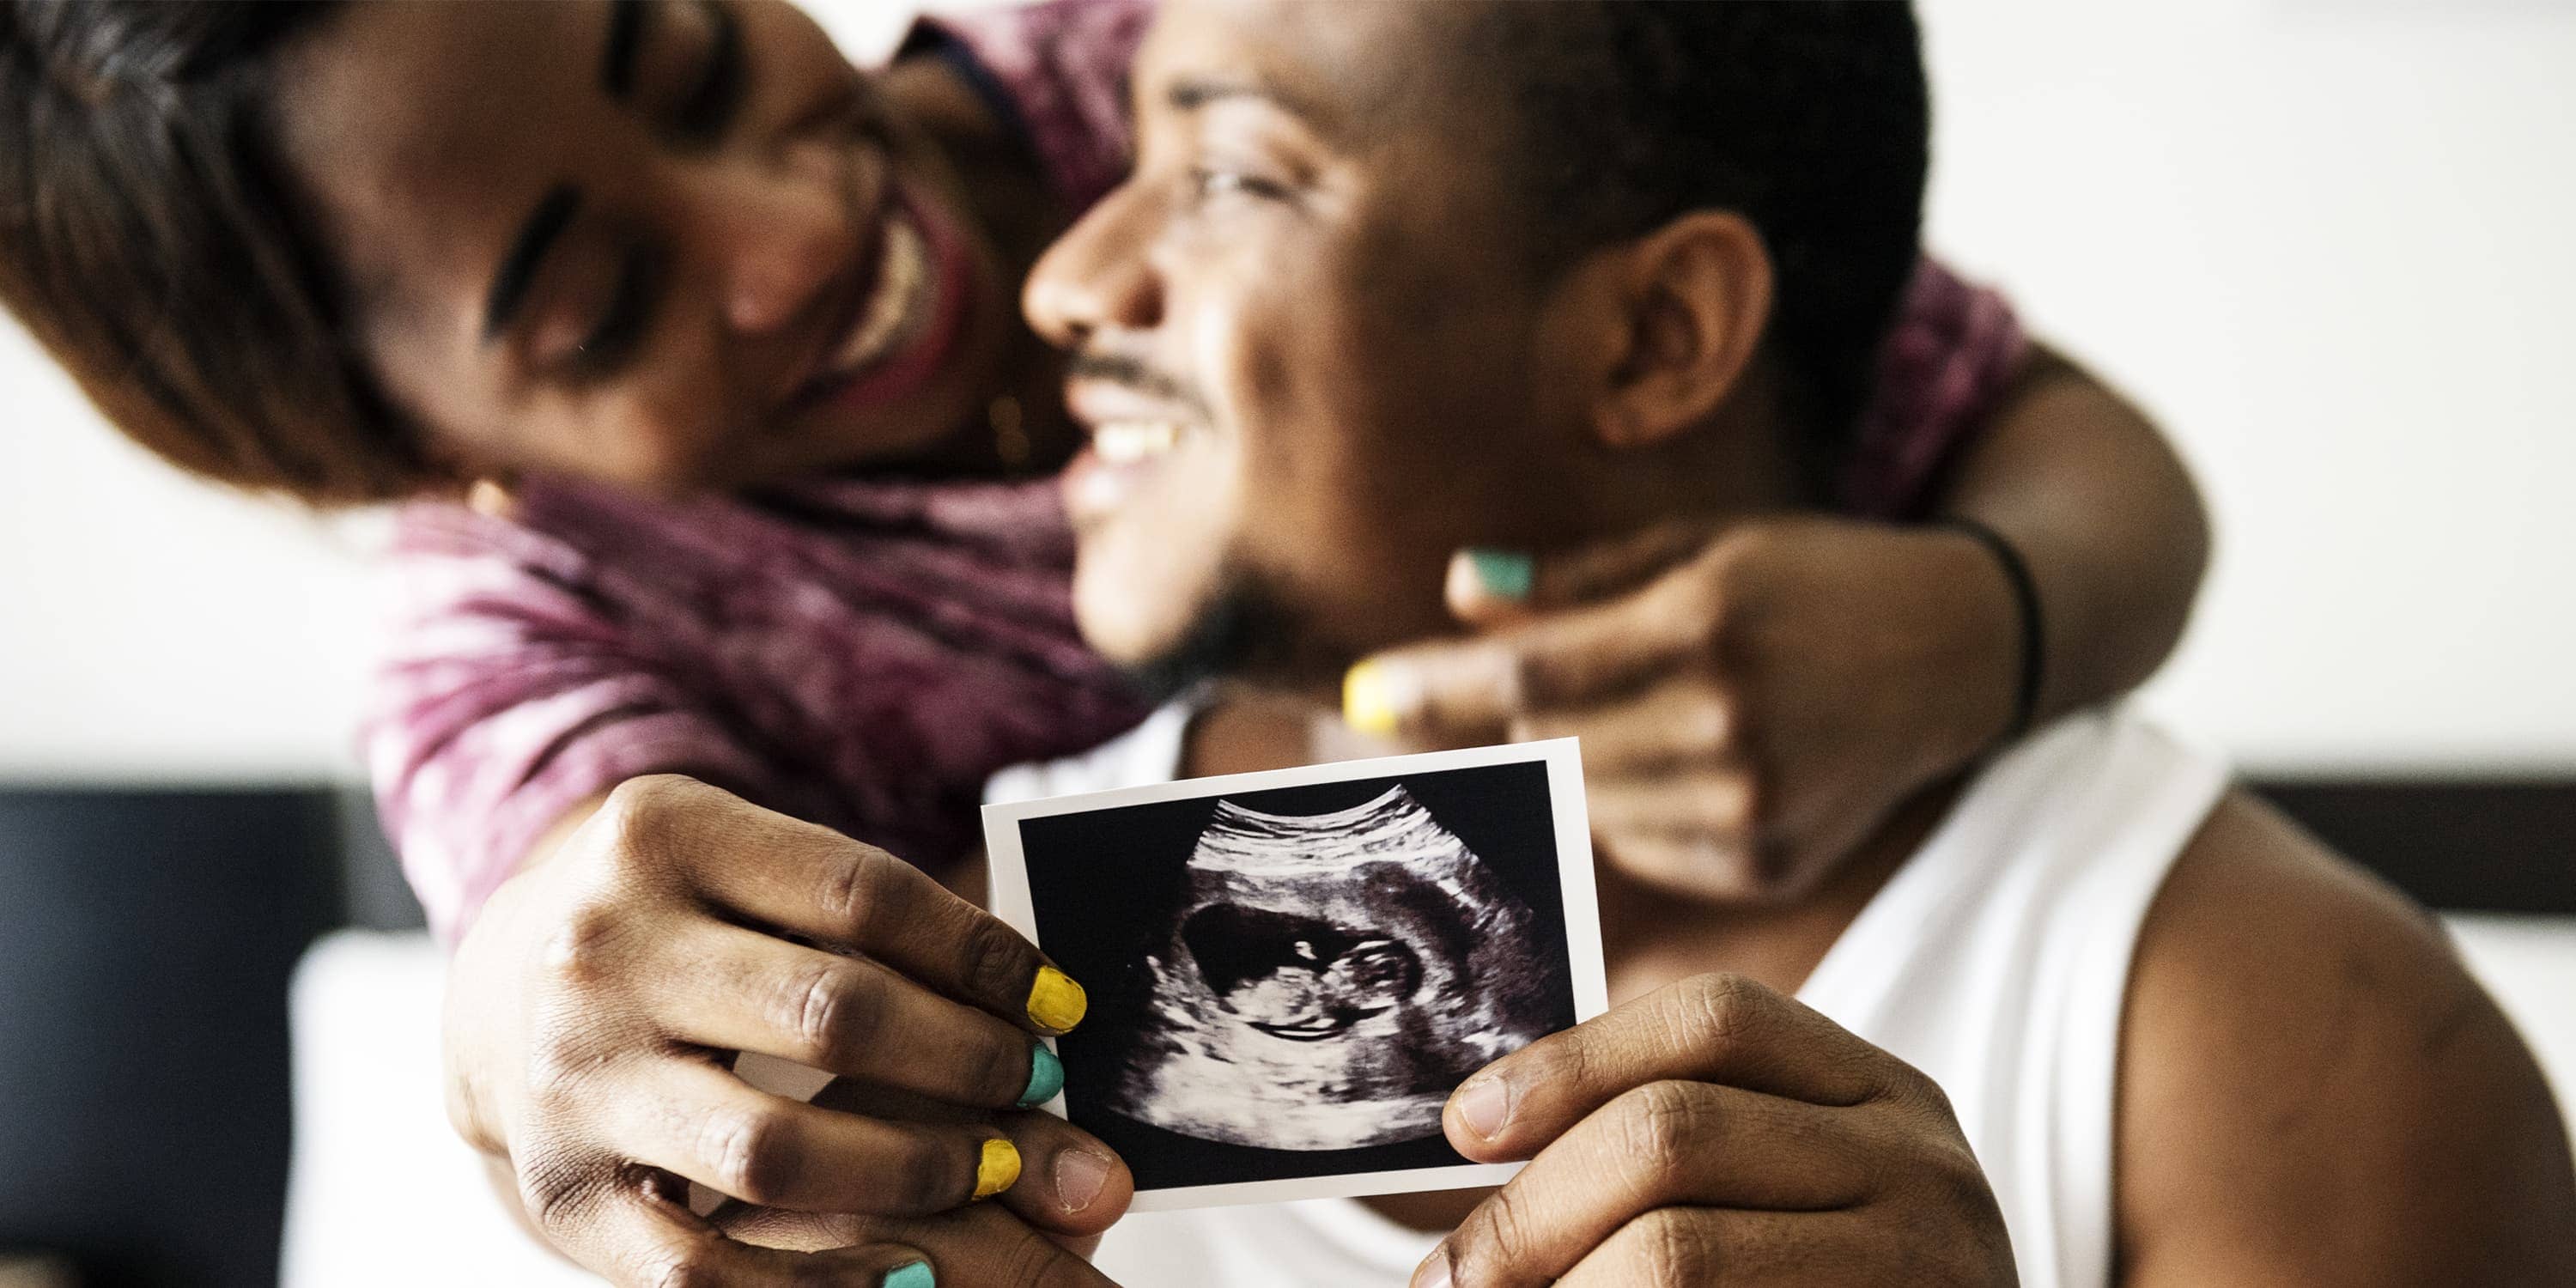 Black couple showing baby ultrasound scan photo